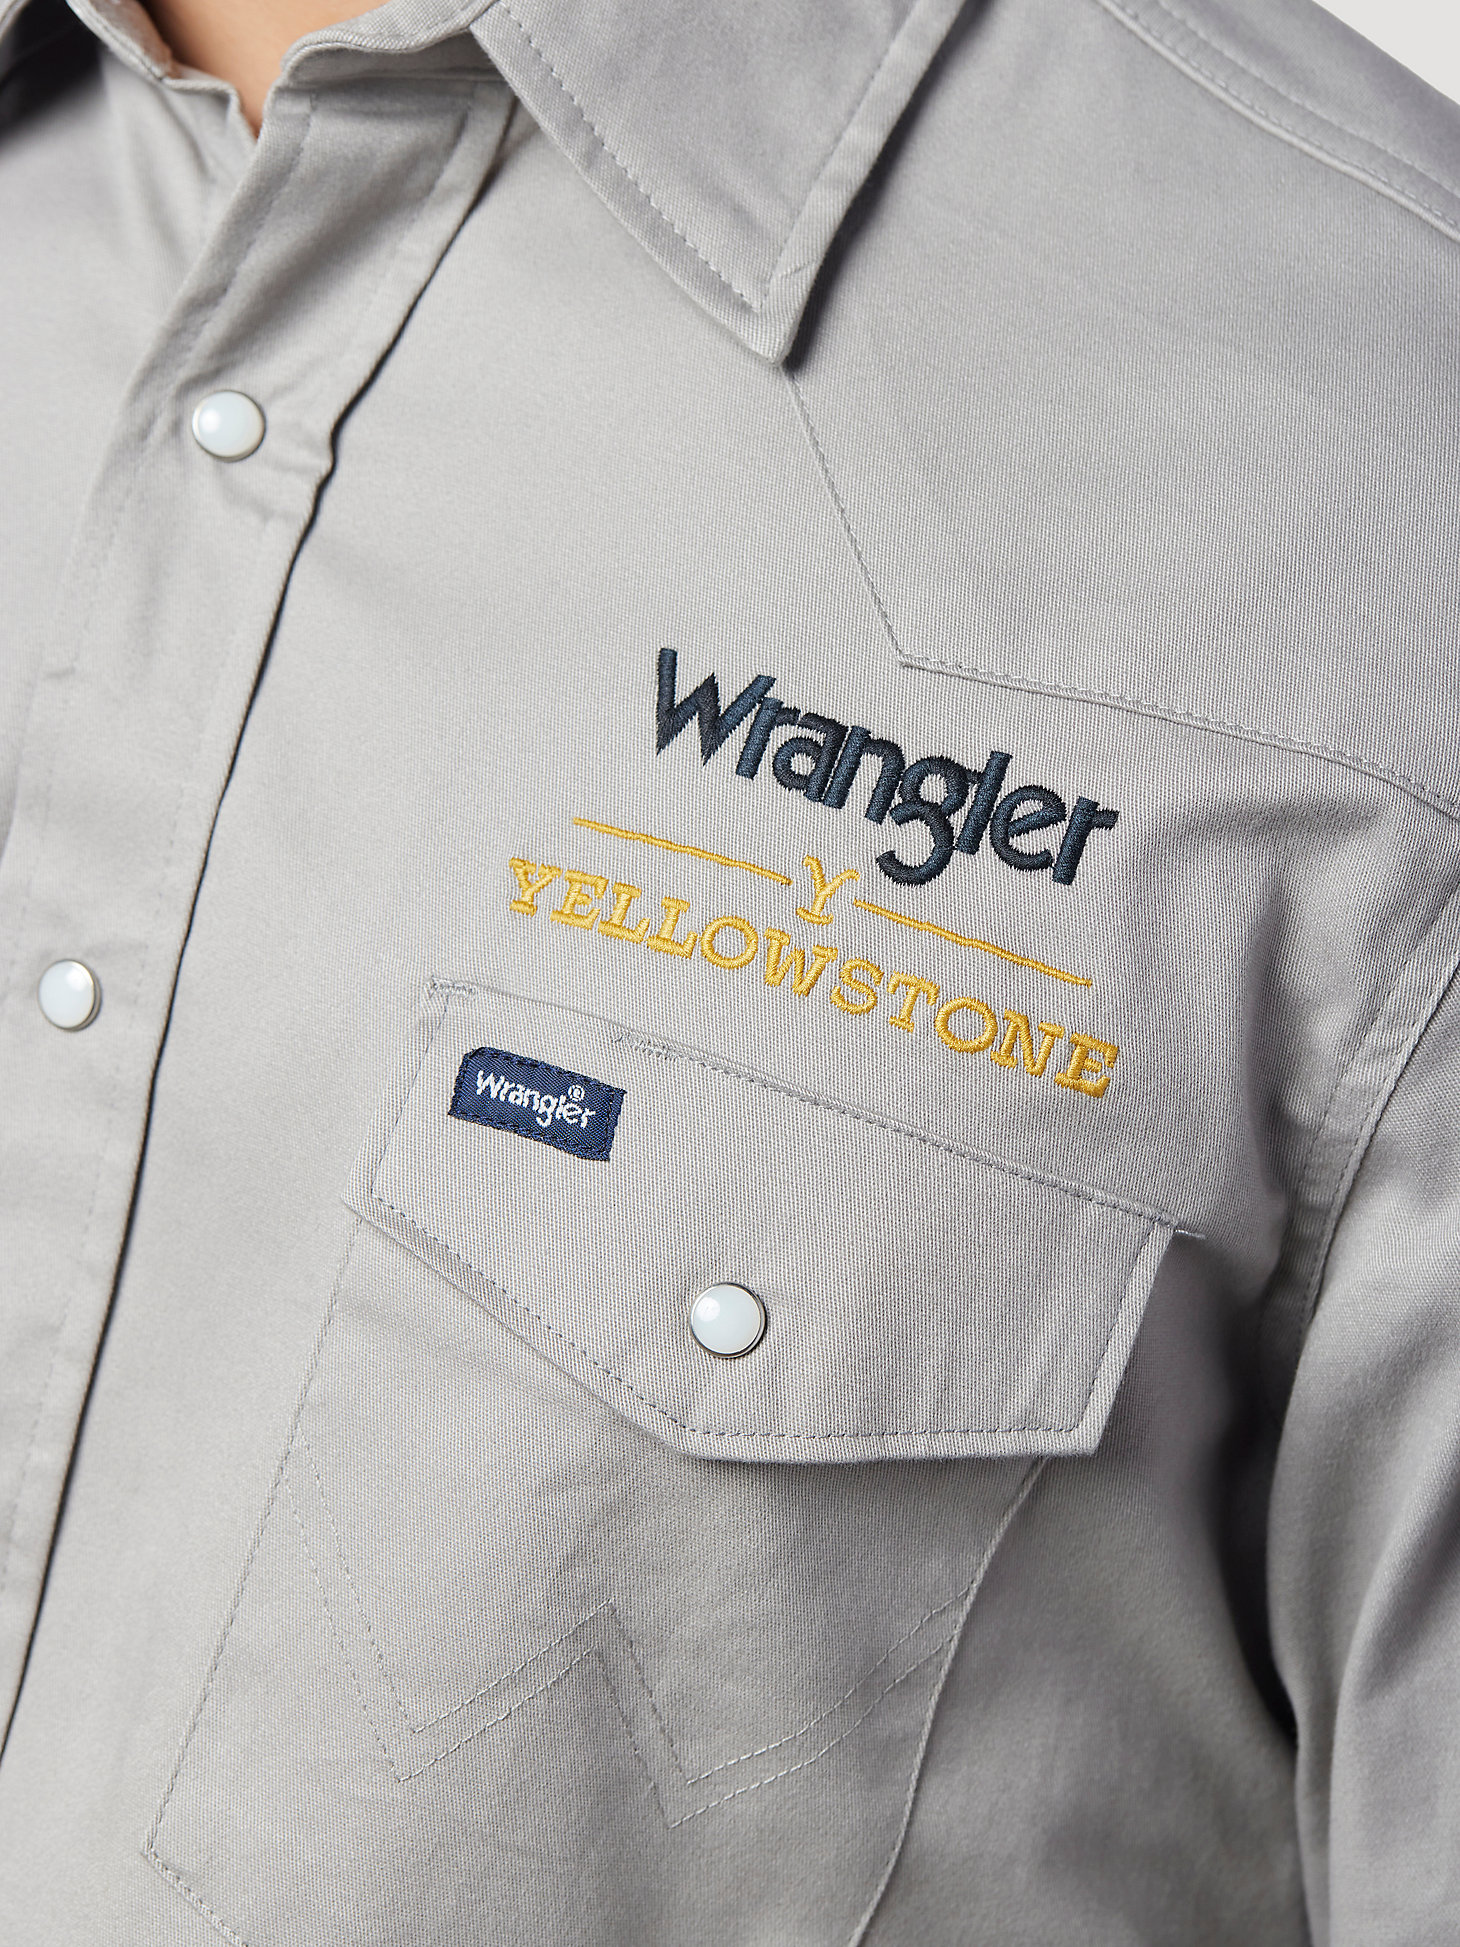 Wrangler x Yellowstone Men's Embroidered Back Twill Work Shirt in Light Grey alternative view 2